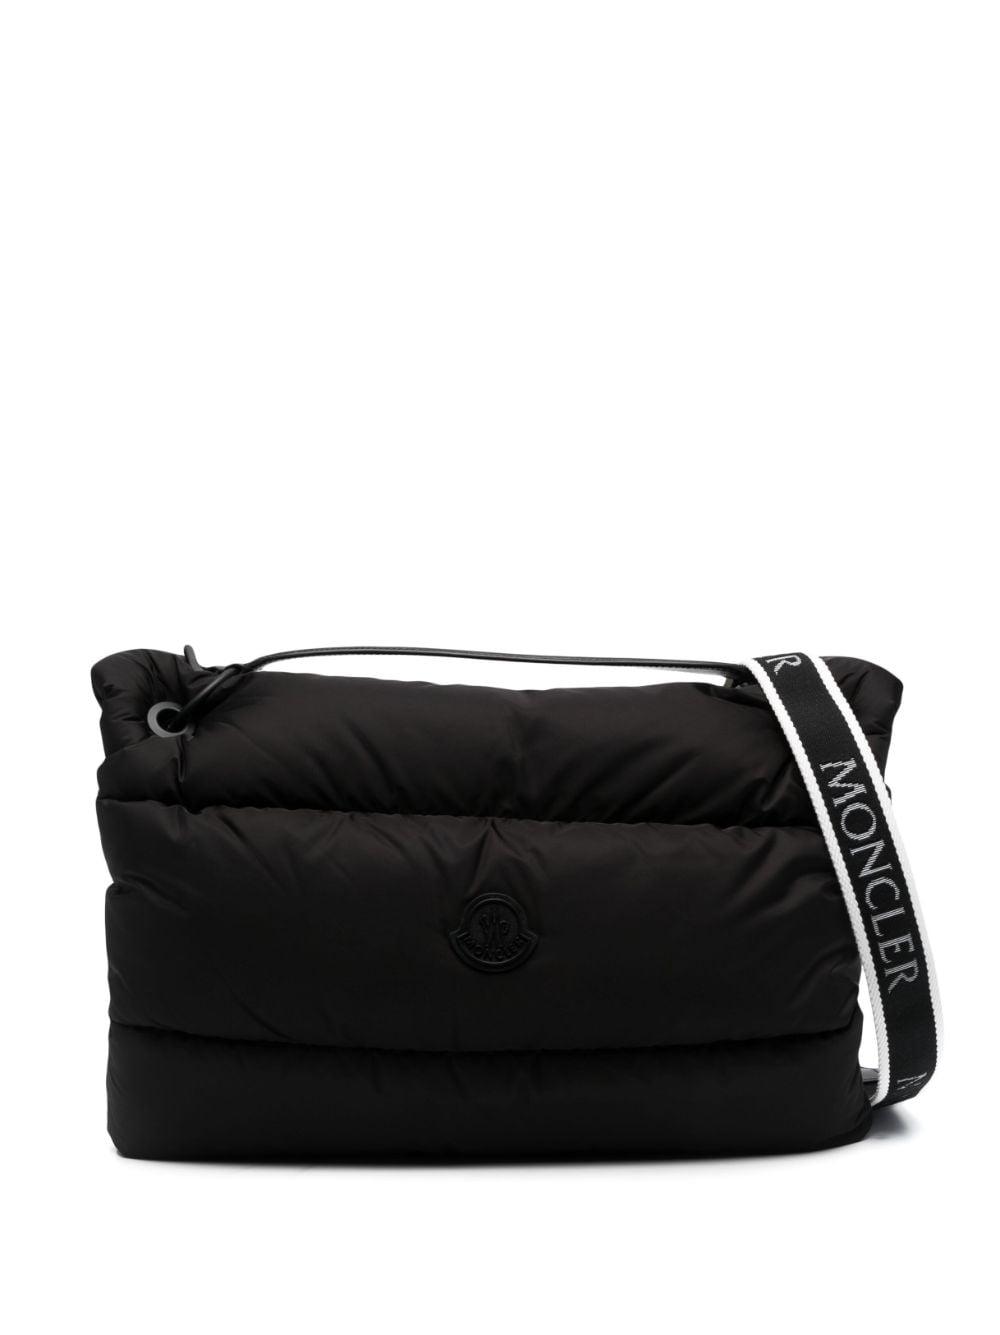 Moncler Legere Quilted Tote Bag in Black | Lyst